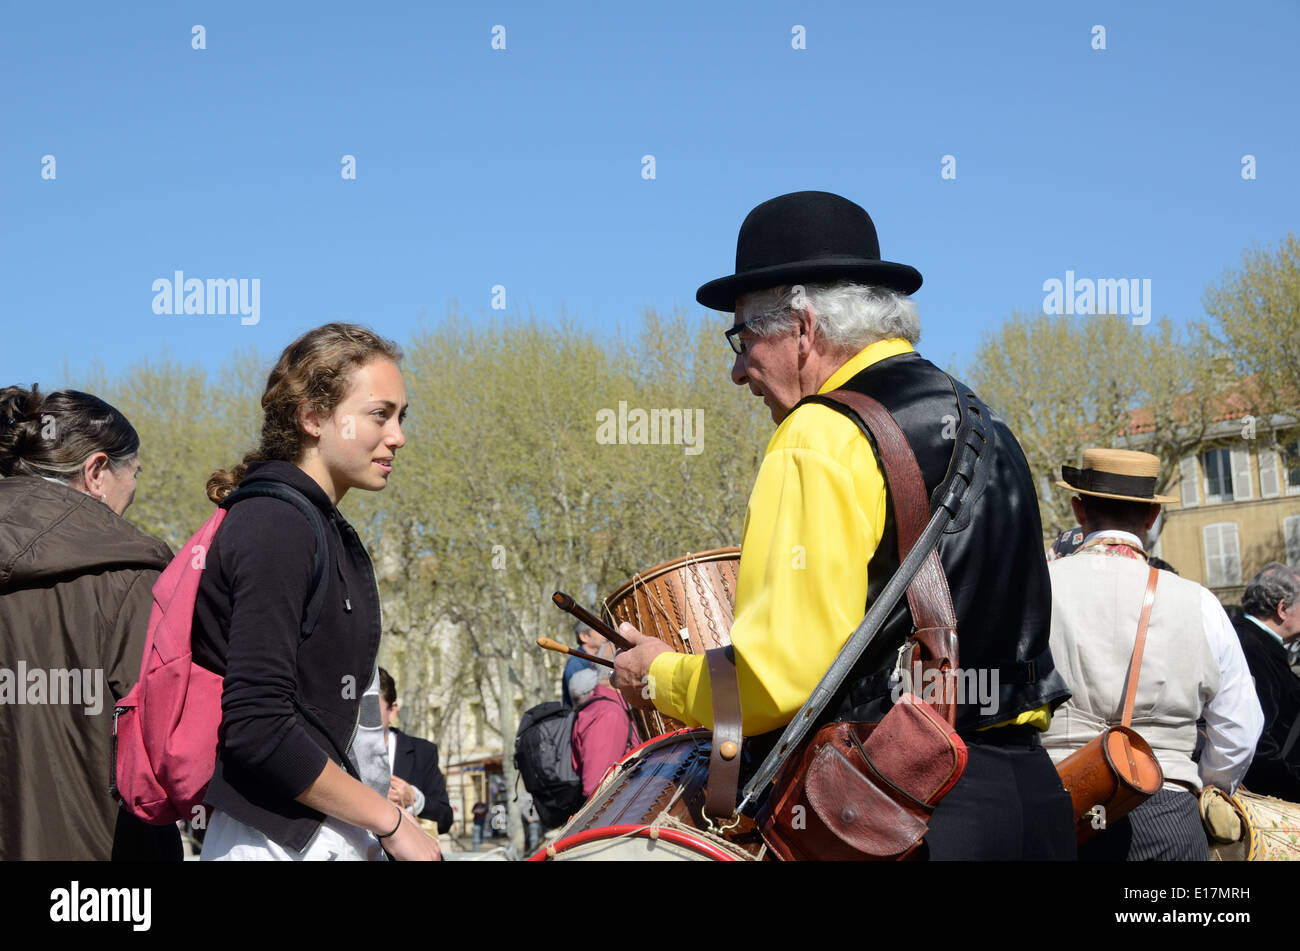 Young & Old Provençaux or Two Generations of French People Chatting or Talking at Music Festival Aix-en-Provence Provence France Stock Photo